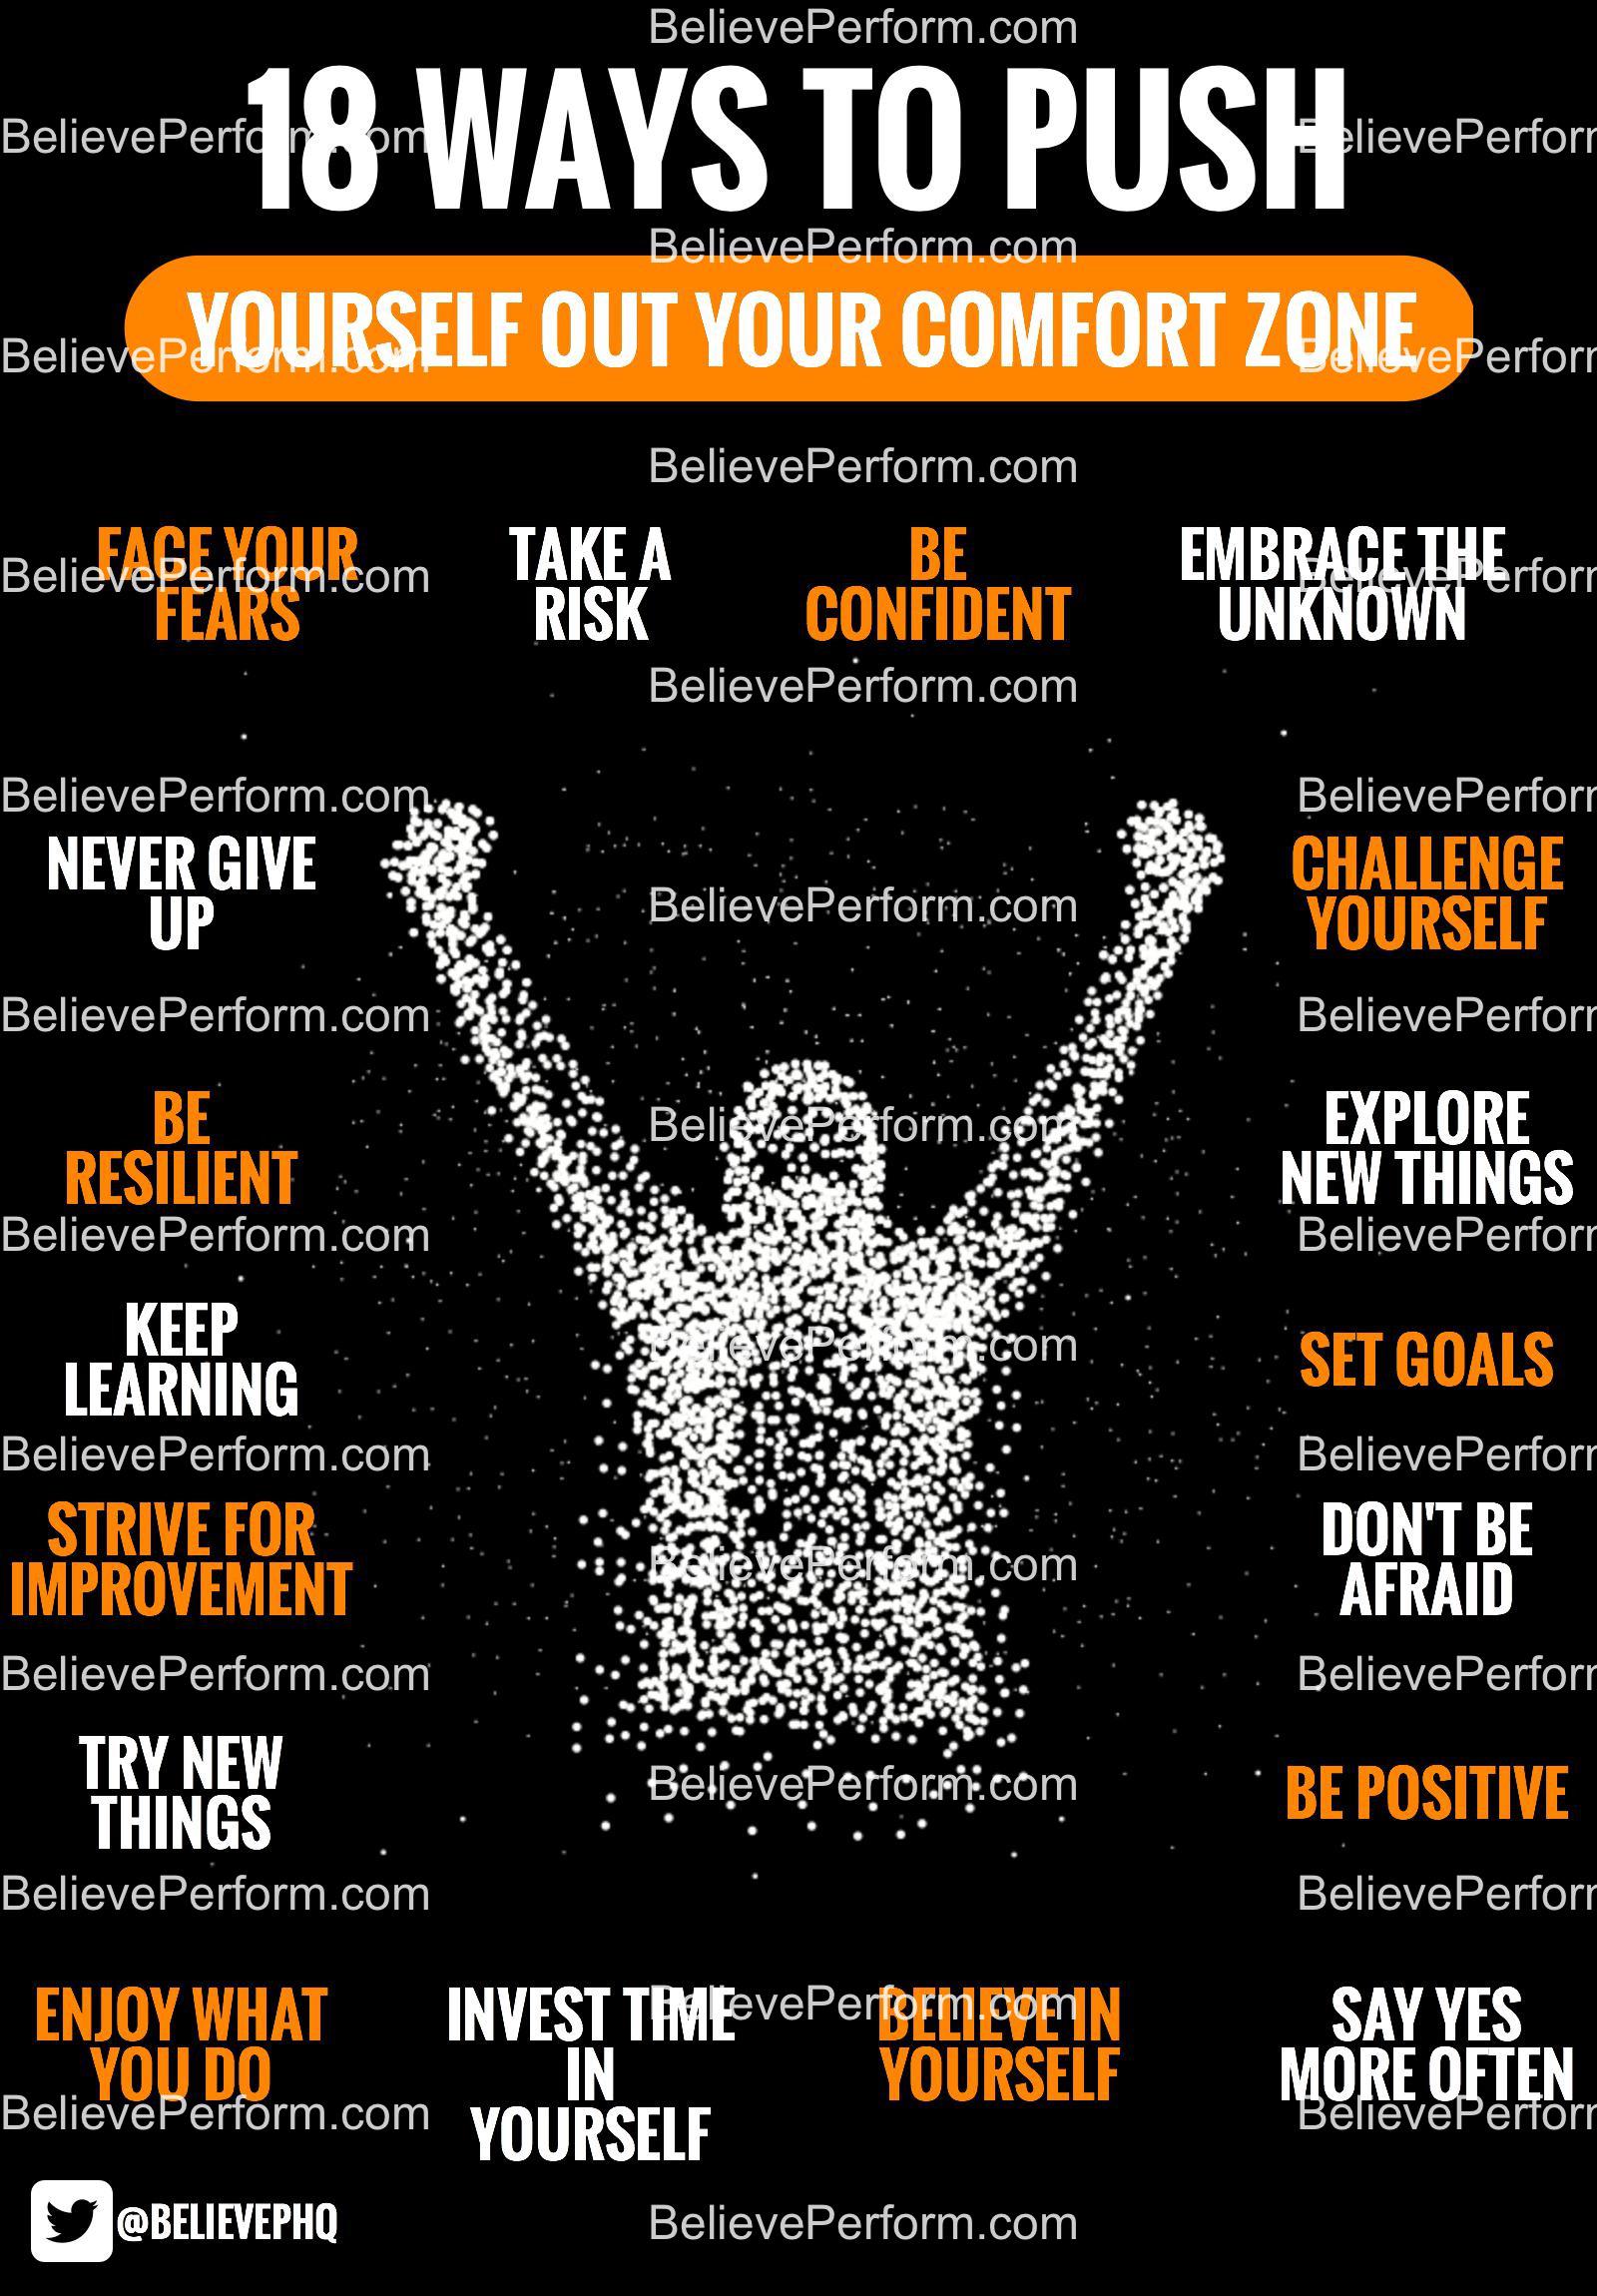 18 ways to push yourself out your comfort zone - BelievePerform